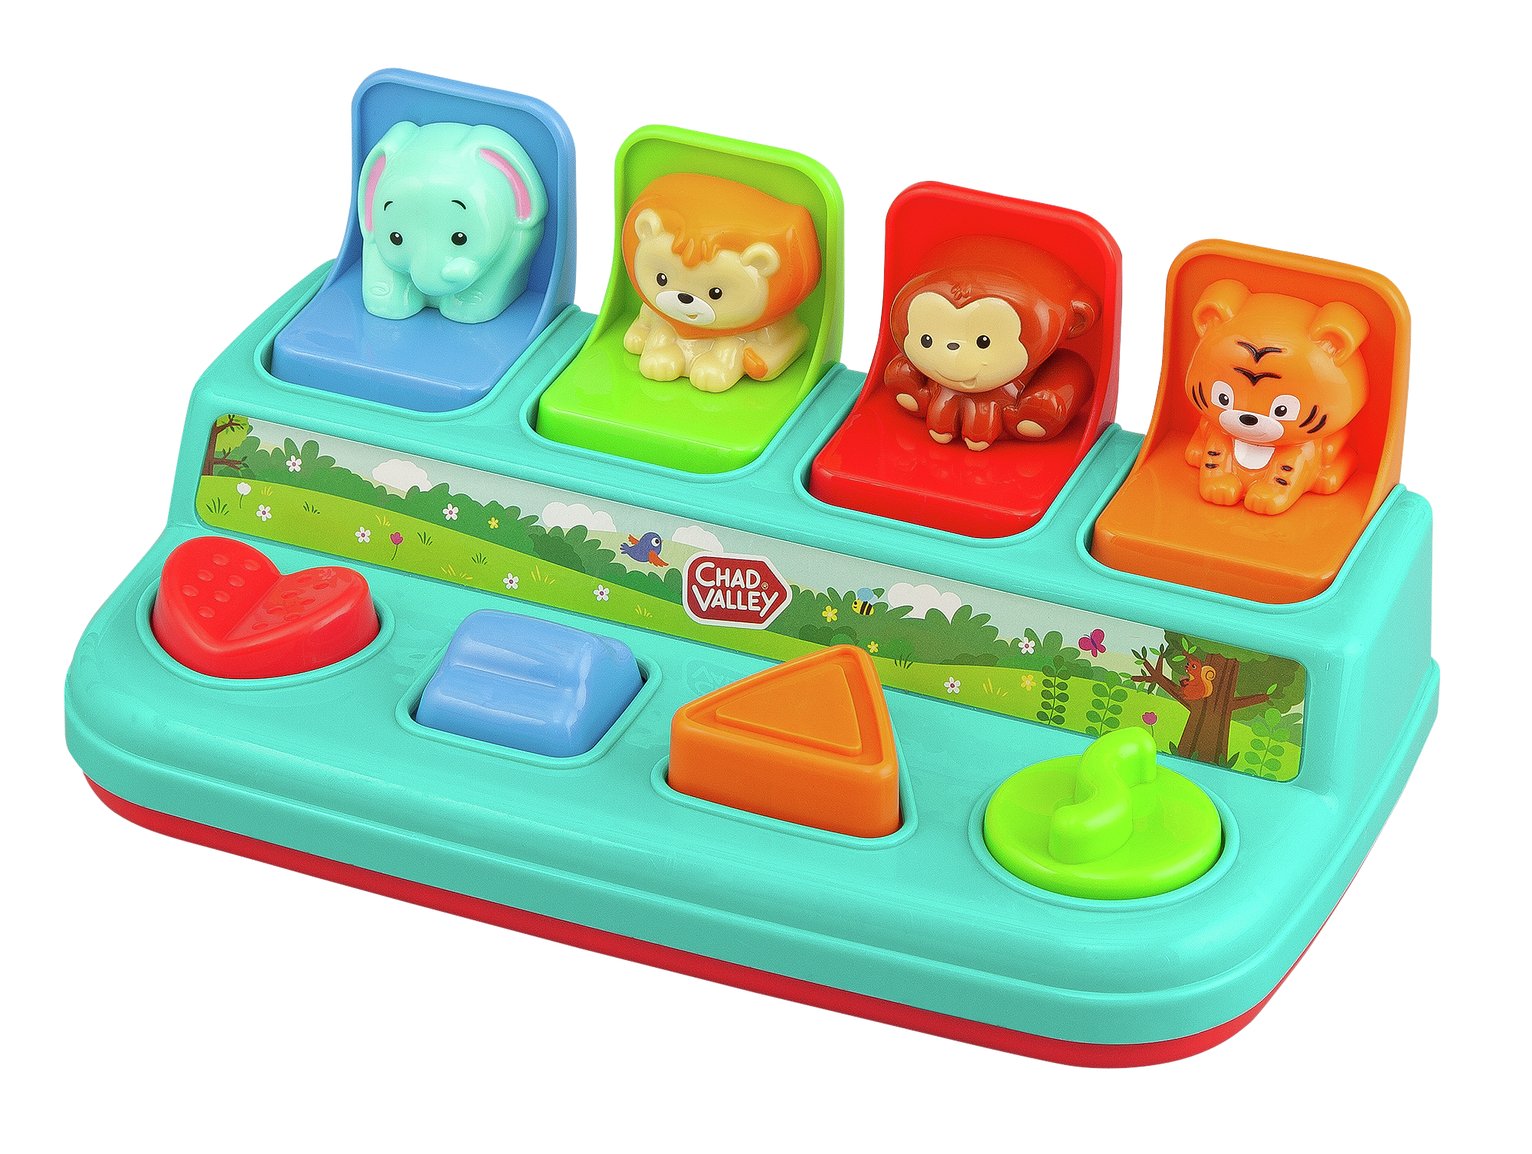 argos toys for 2 years old girl